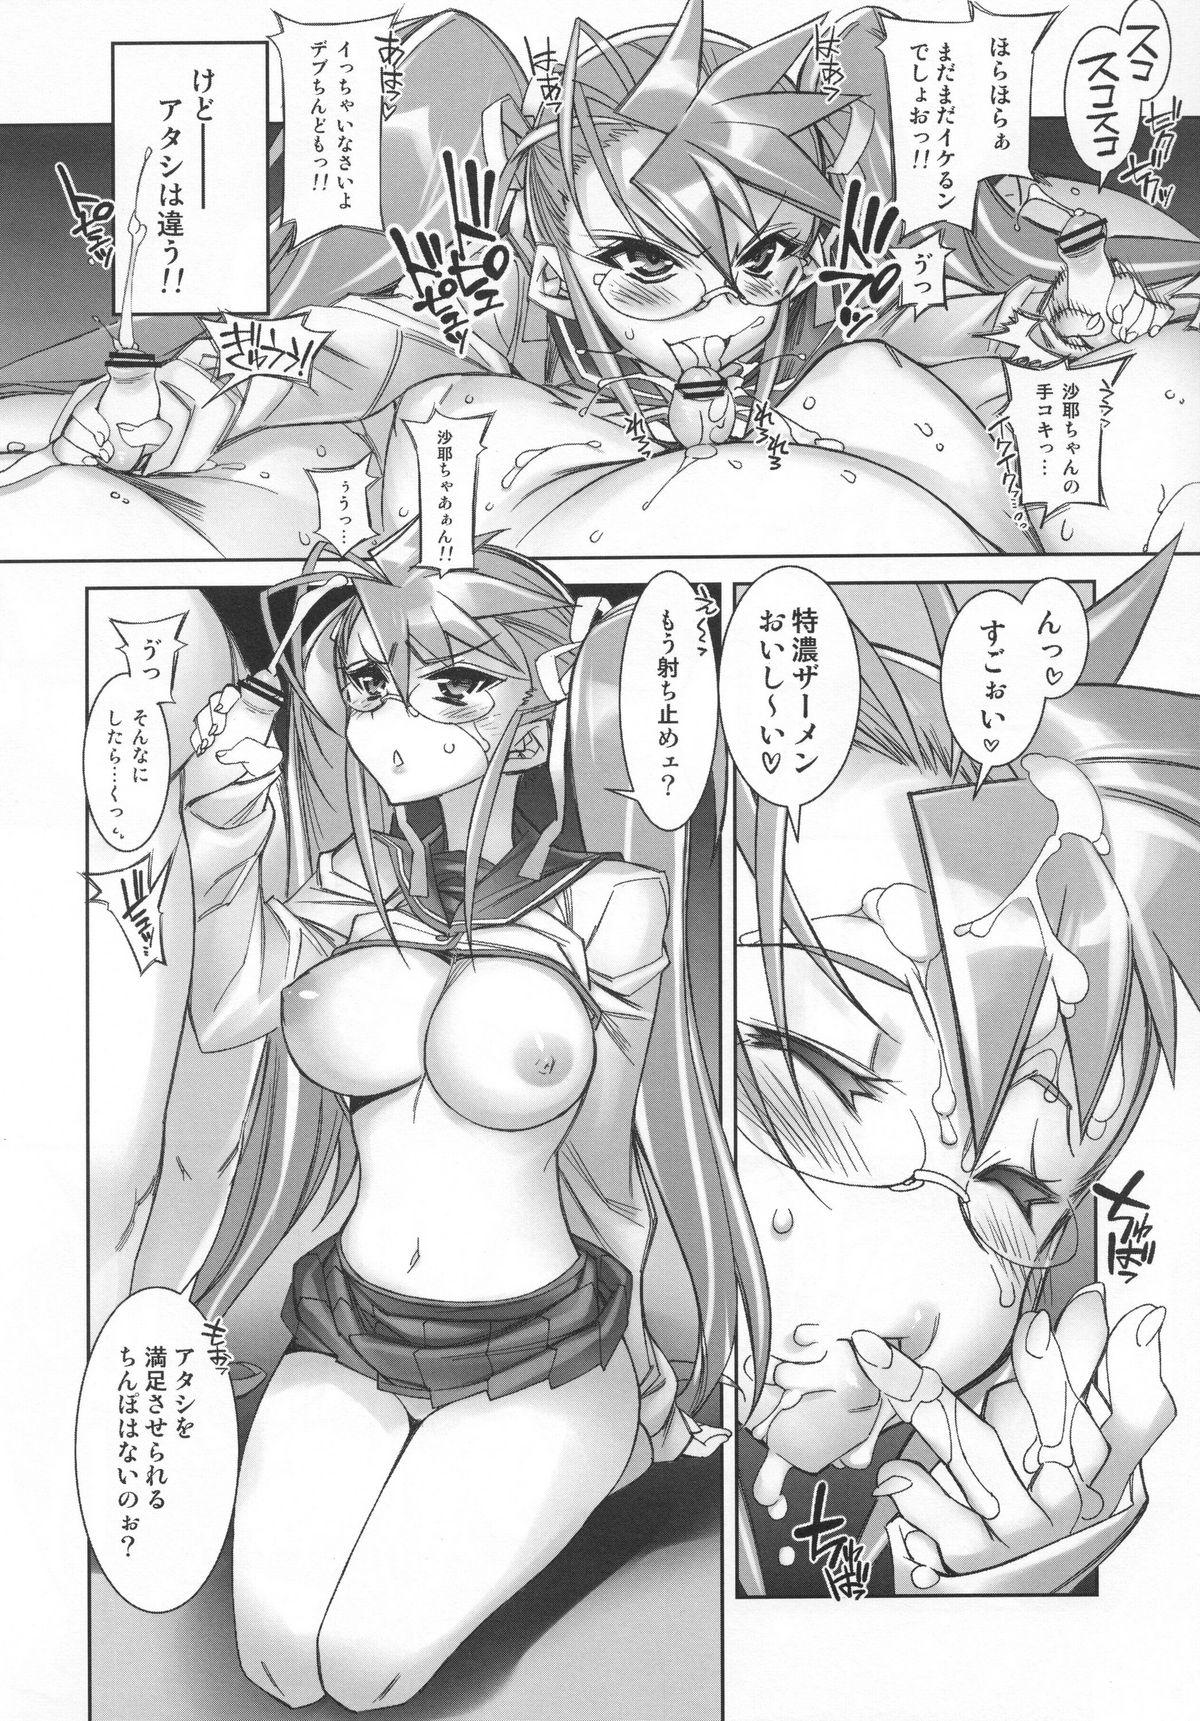 Audition SWAPPING OF THE DEAD 2/3 - Highschool of the dead Kink - Page 7